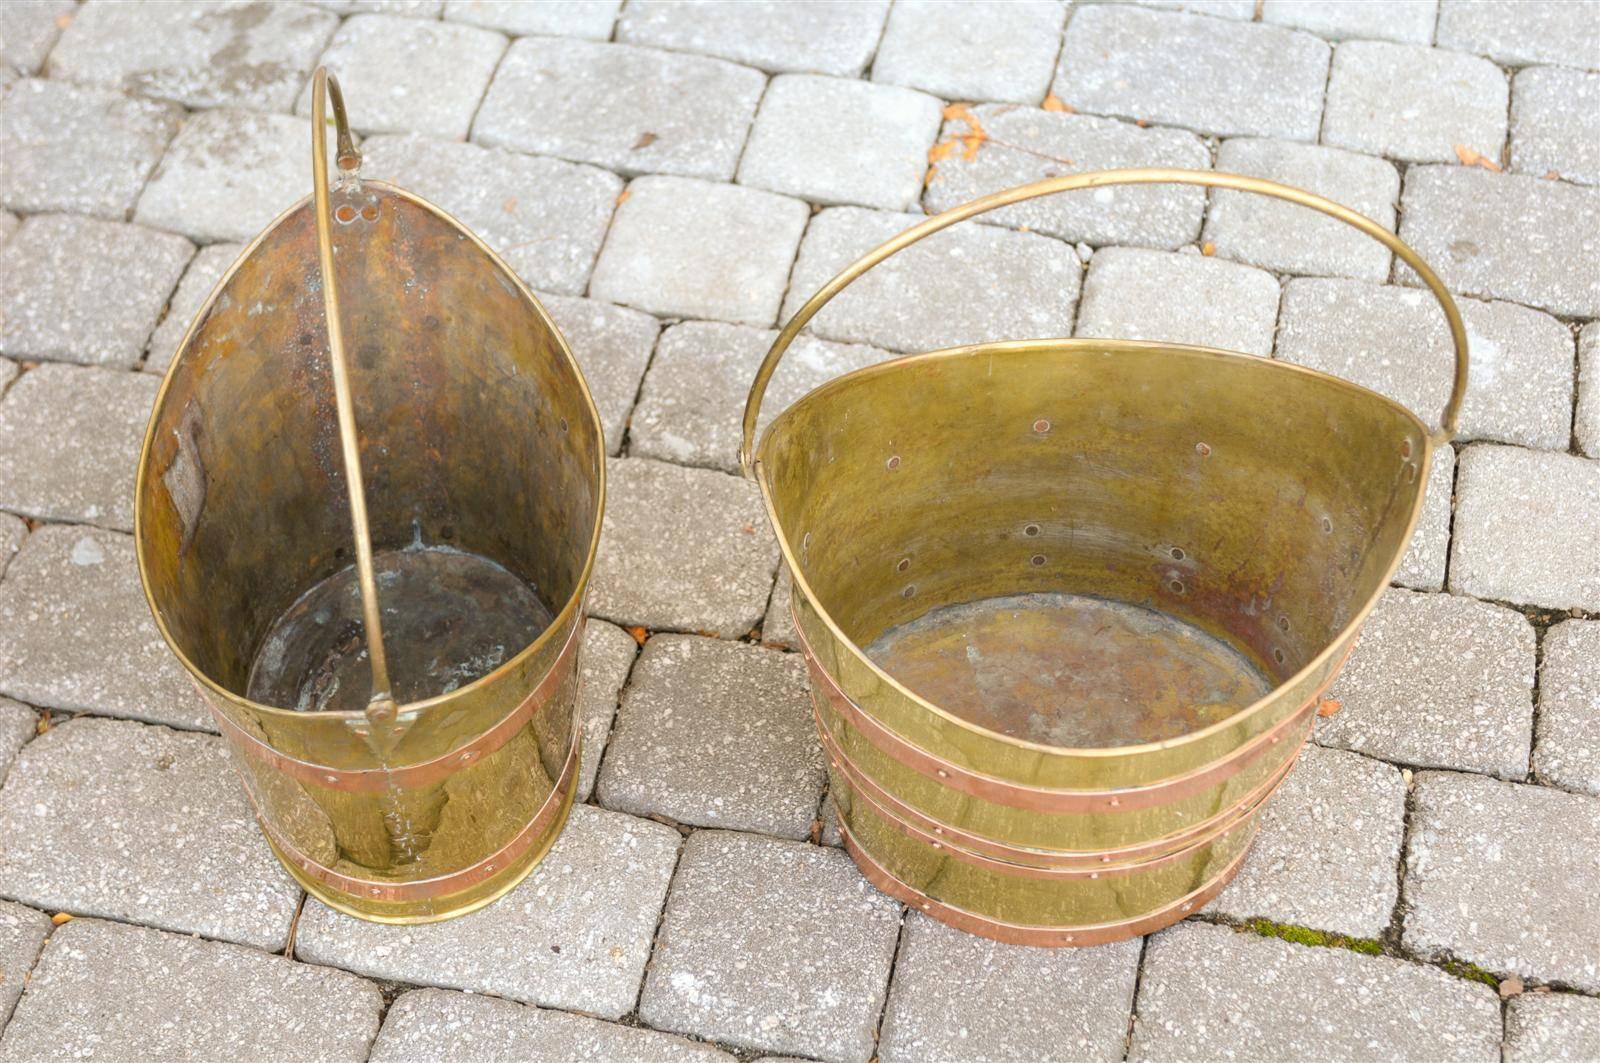 English Wide Mouth Brass Bucket with Copper Straps from the Early 20th Century For Sale 4